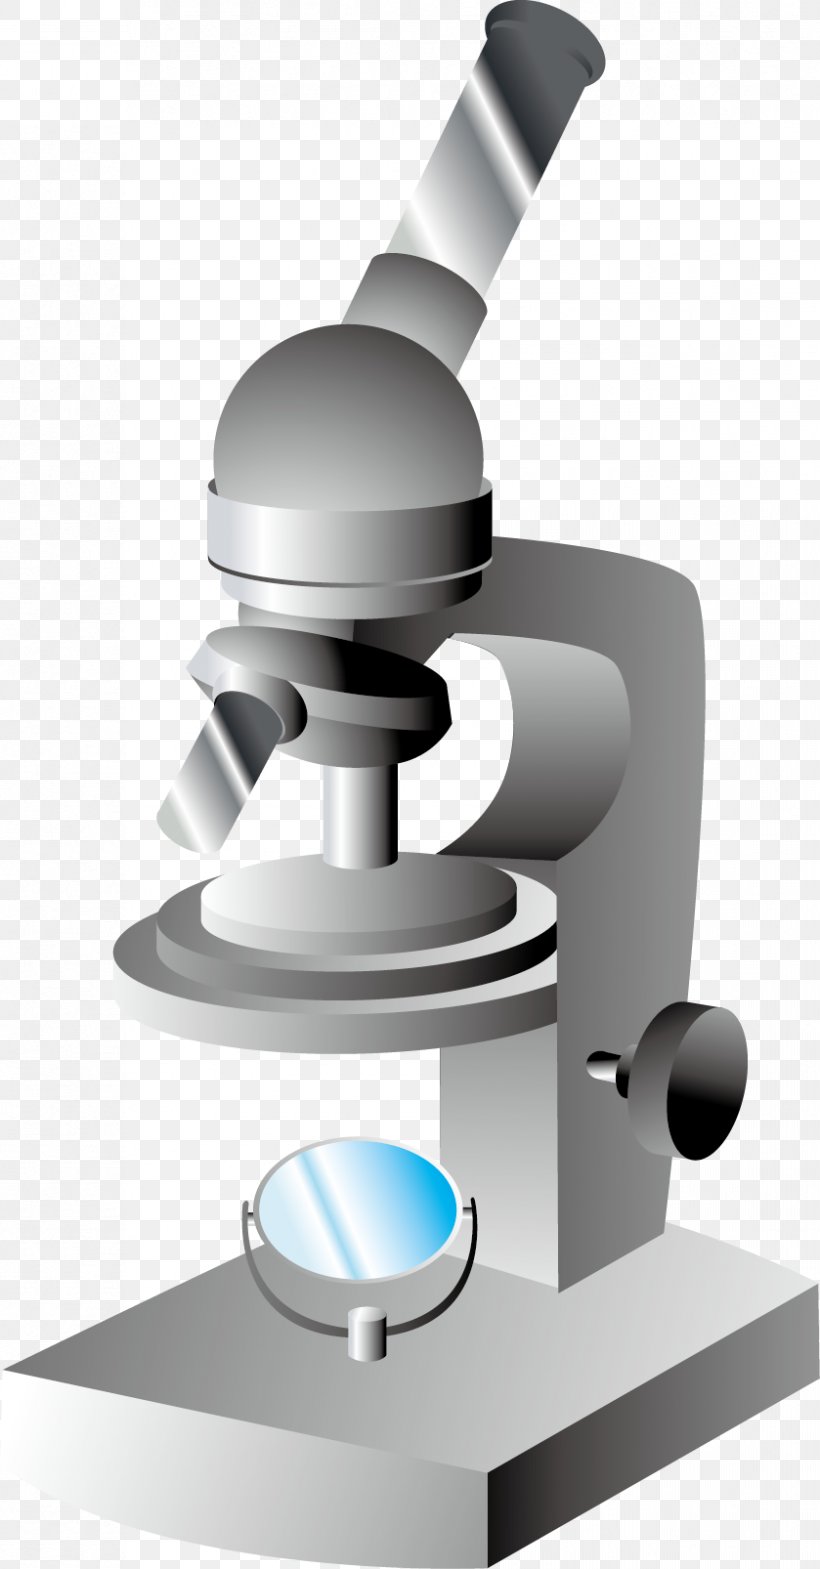 Microscope Image Processing, PNG, 839x1606px, Microscope, Adobe Freehand, Microscope Image Processing, Monocular, Optical Microscope Download Free